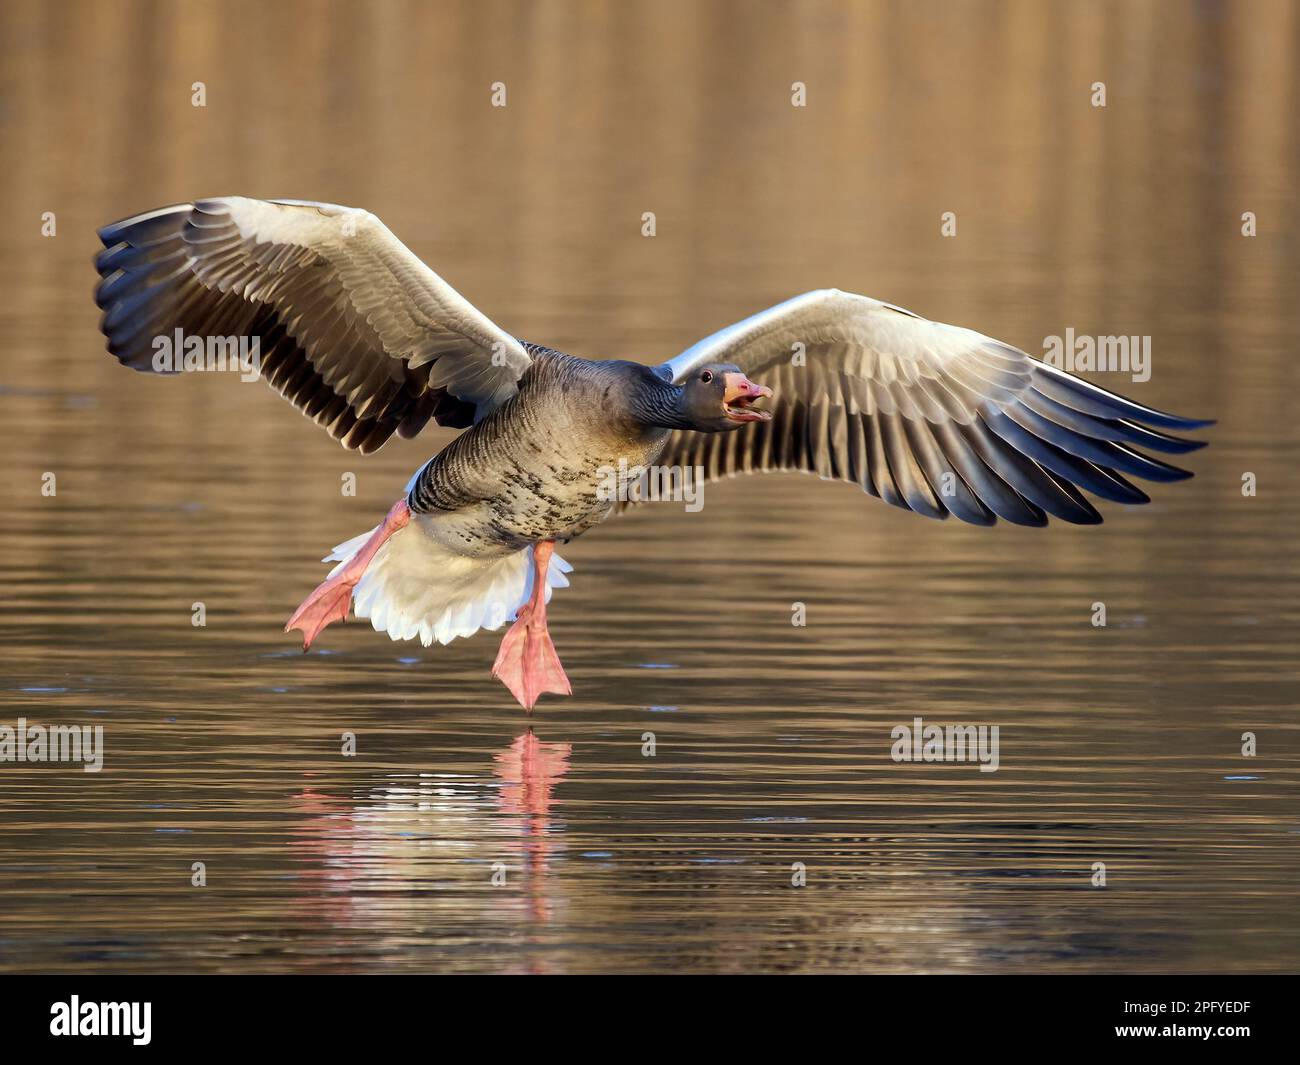 Greylag goose (Anser anser) in its natural environment Stock Photo